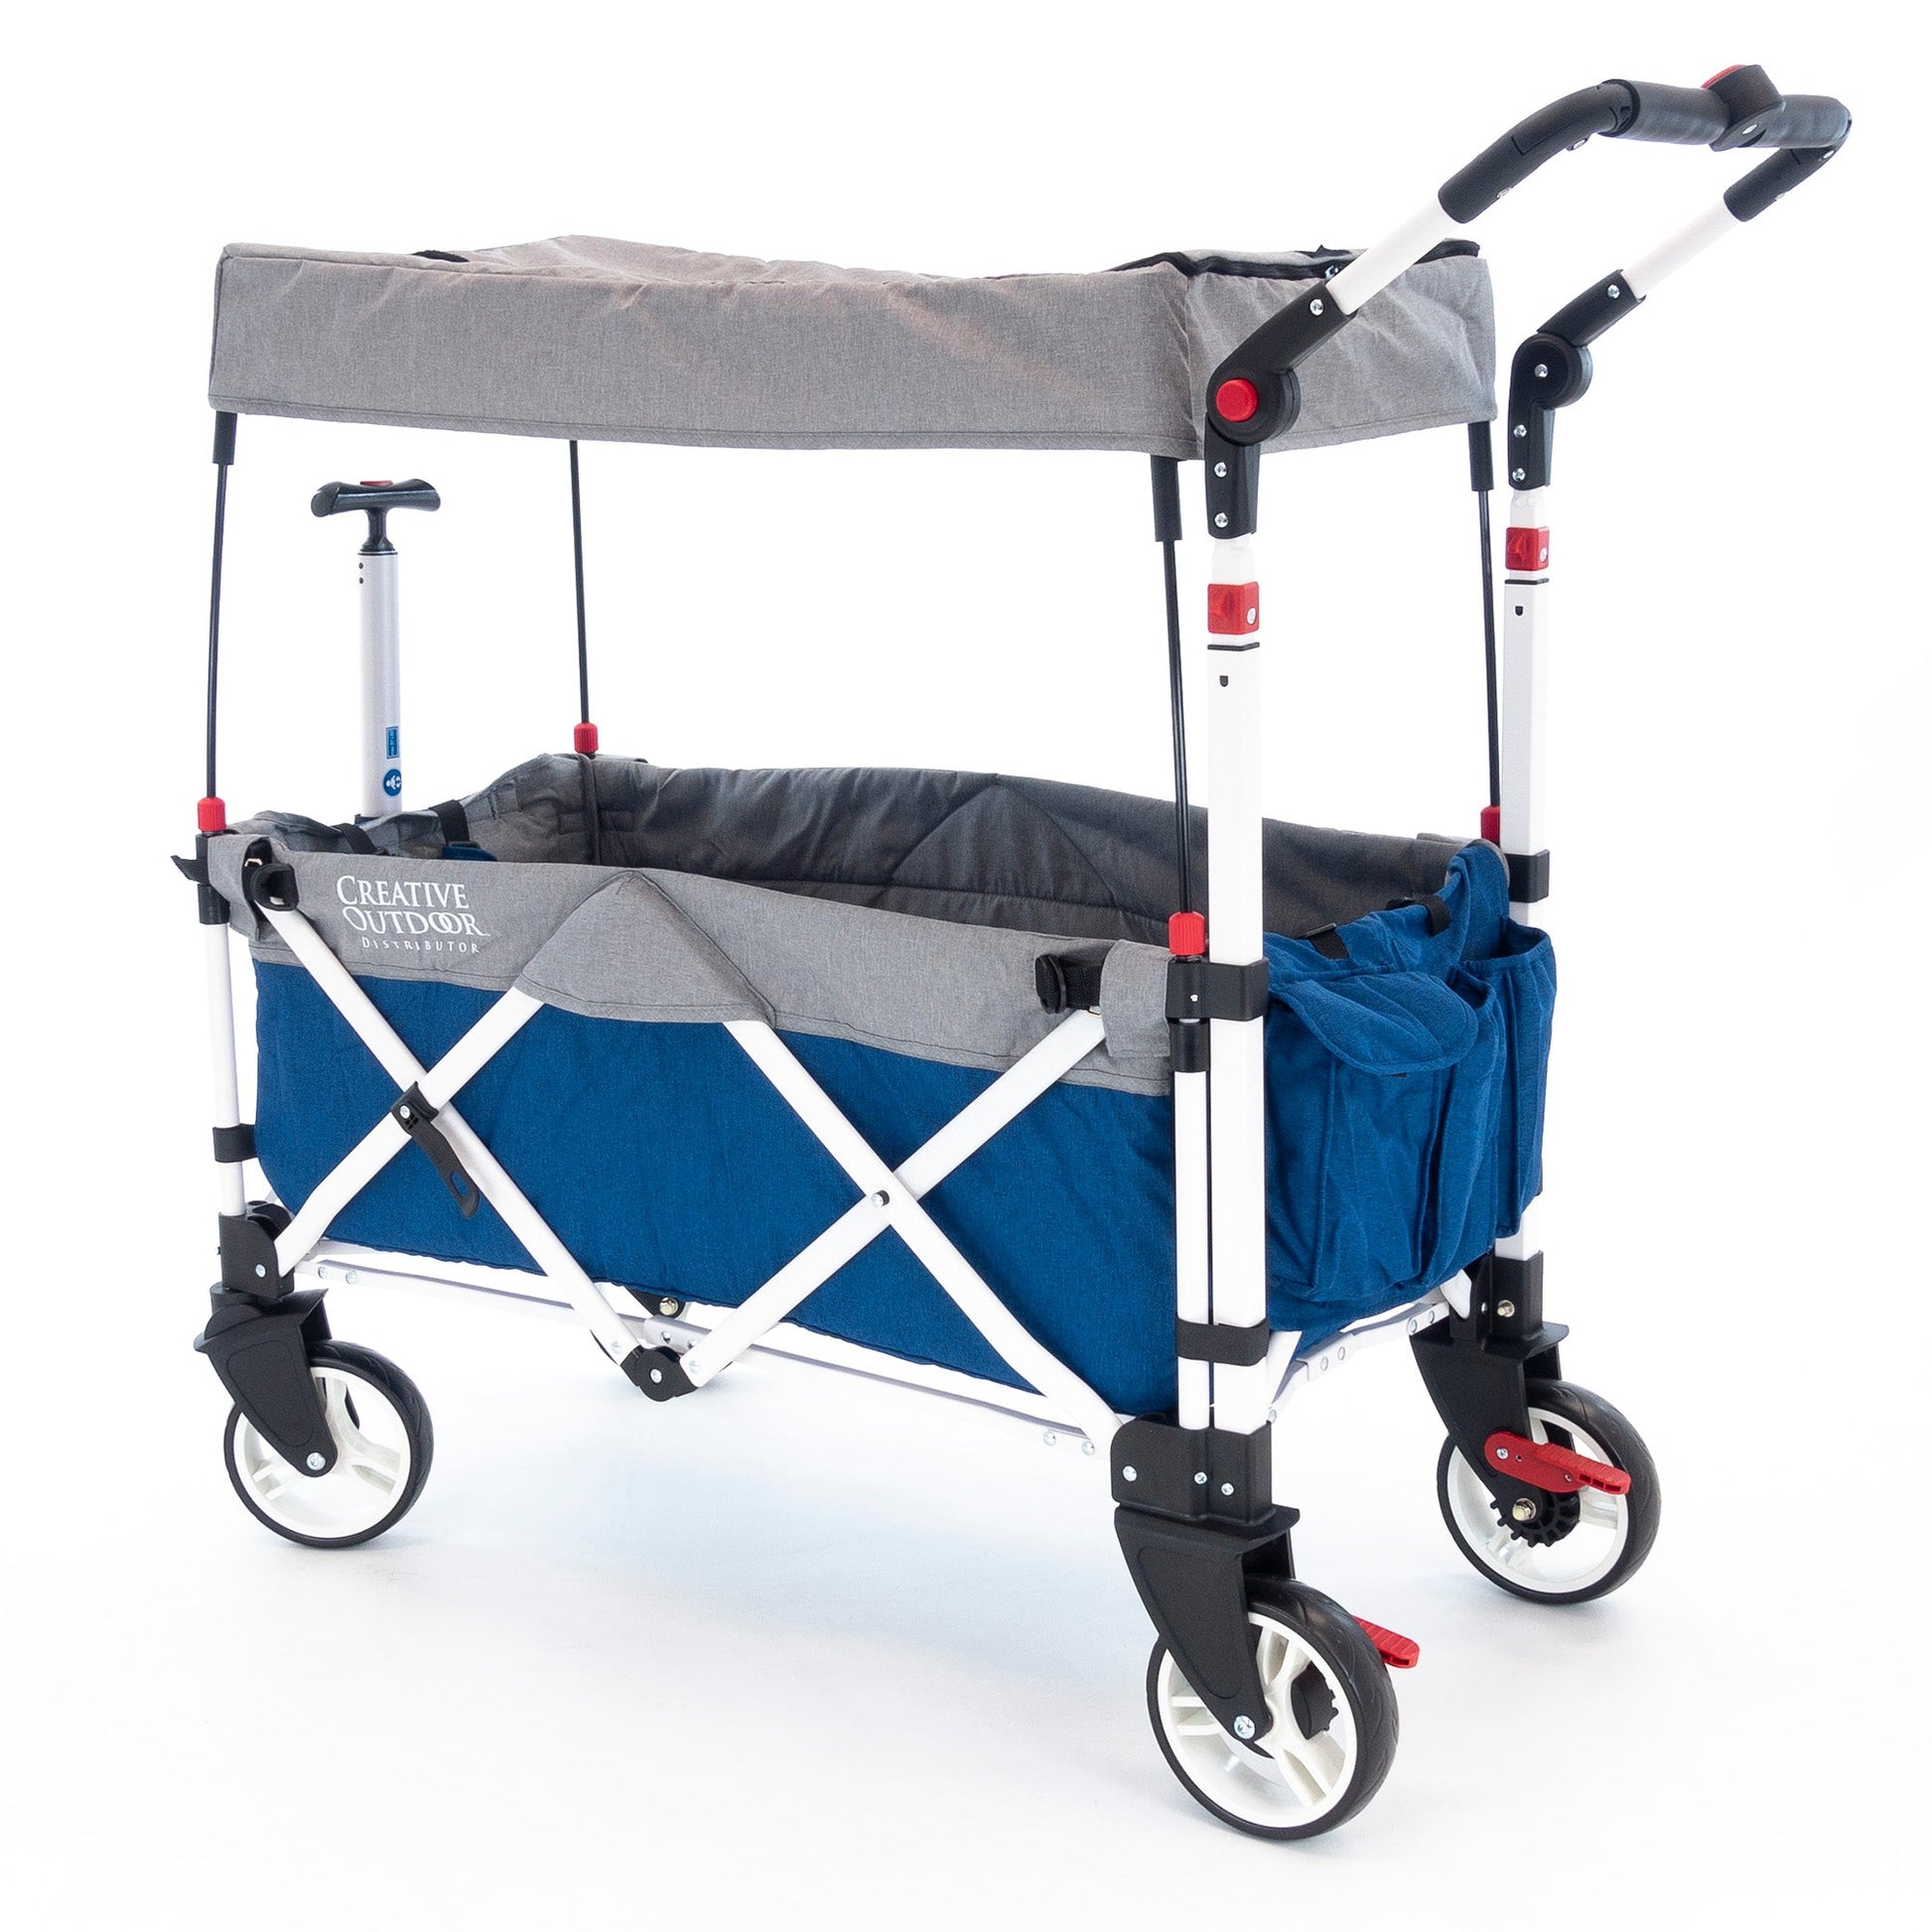 pack-and-push-folding-stroller-wagon-blue-gray